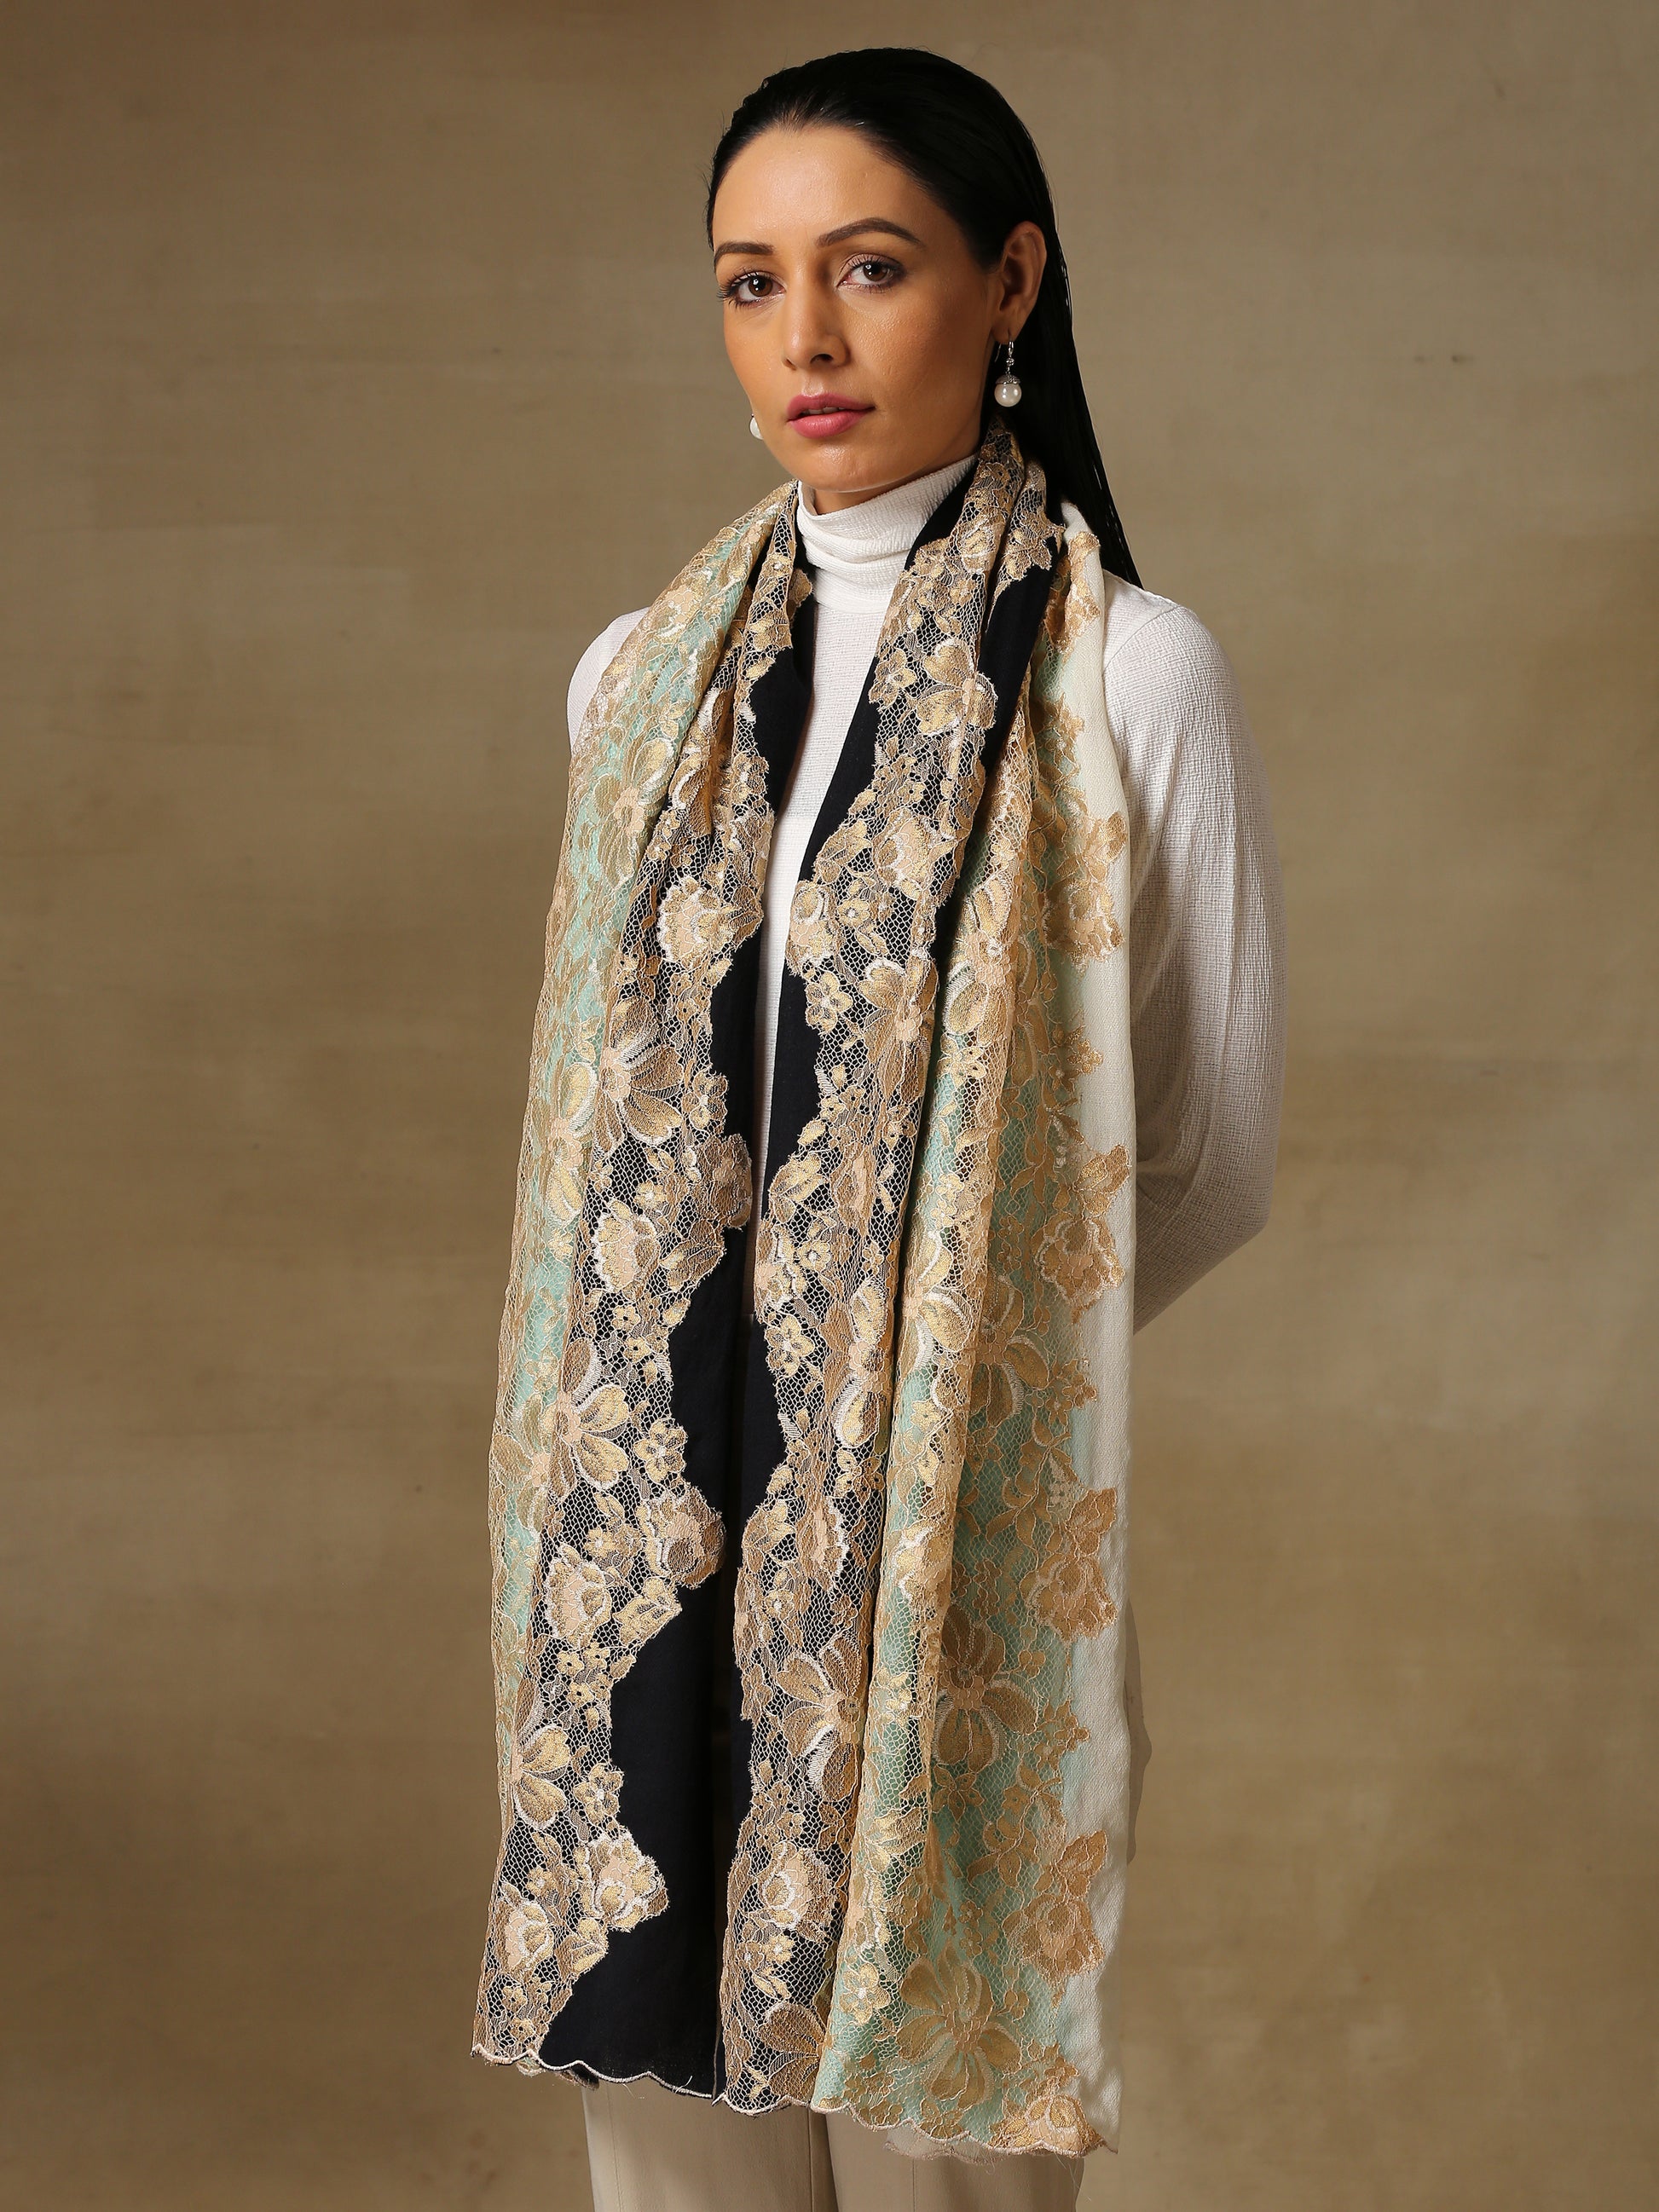 Model is wearing Celestial Chantilly stole from Shaza in ombre of white, black and blue. 